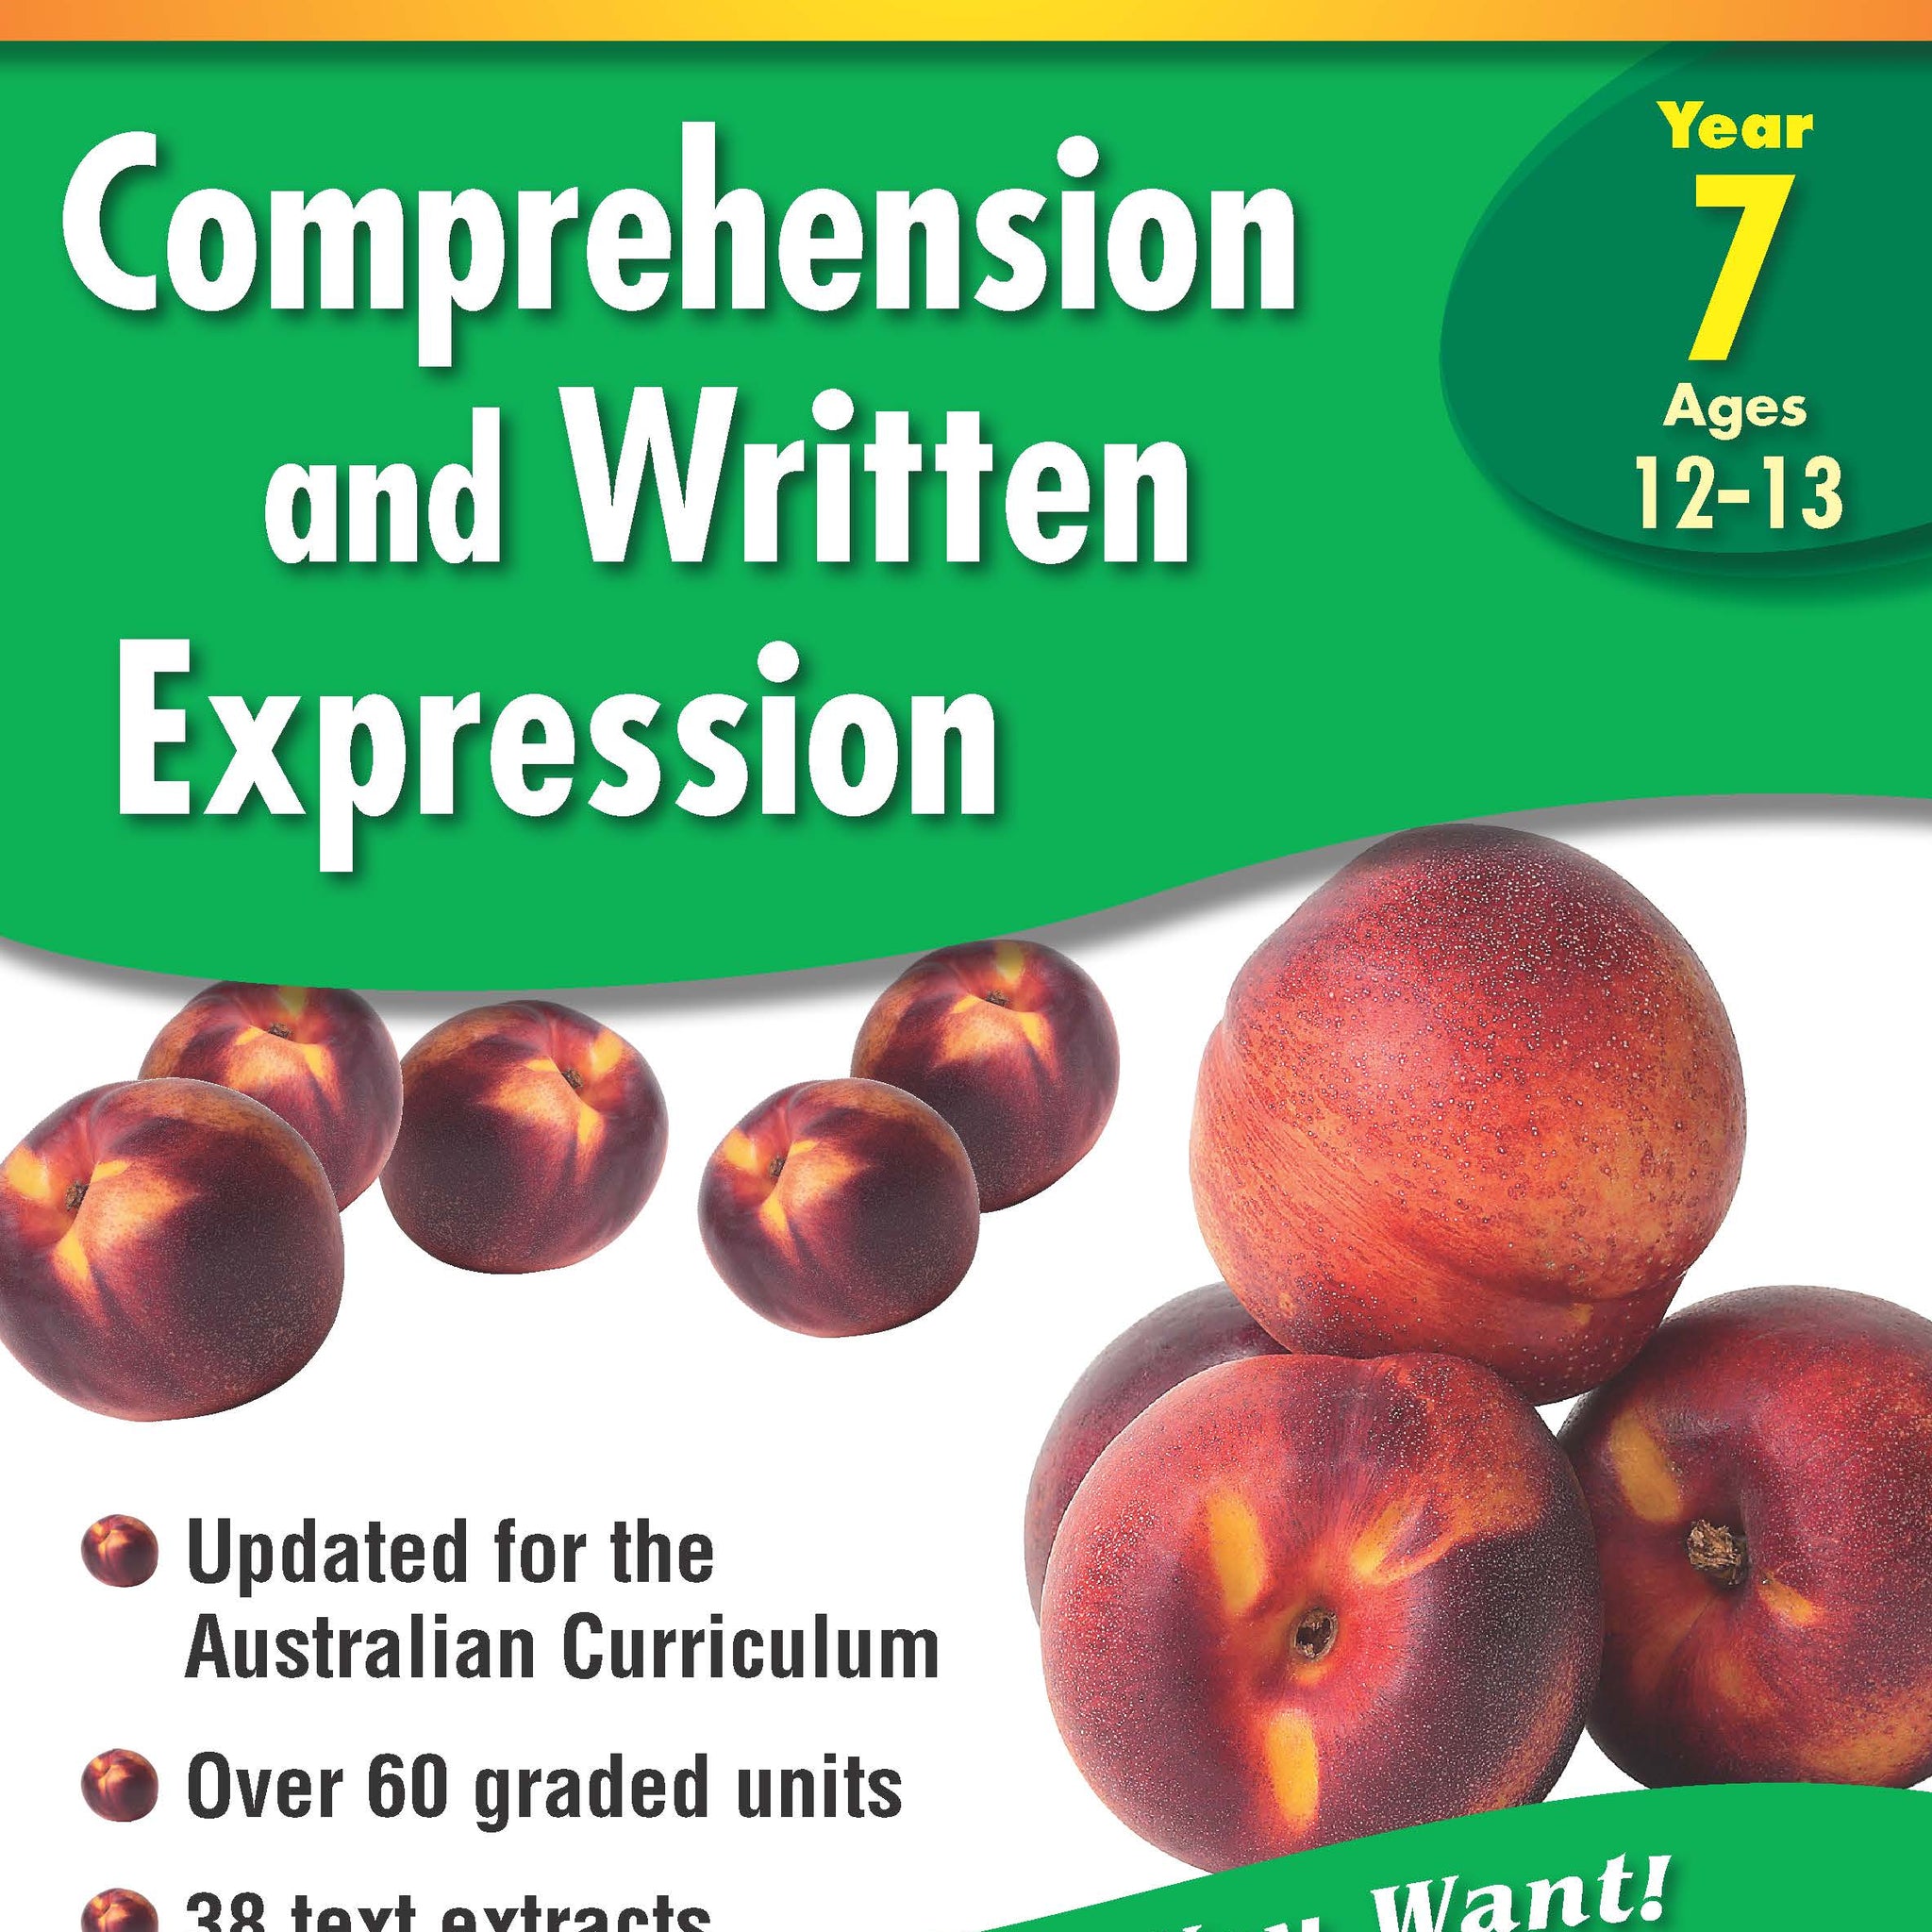 Excel Basic Skills Workbook: Comprehension and Written Expression Year 7